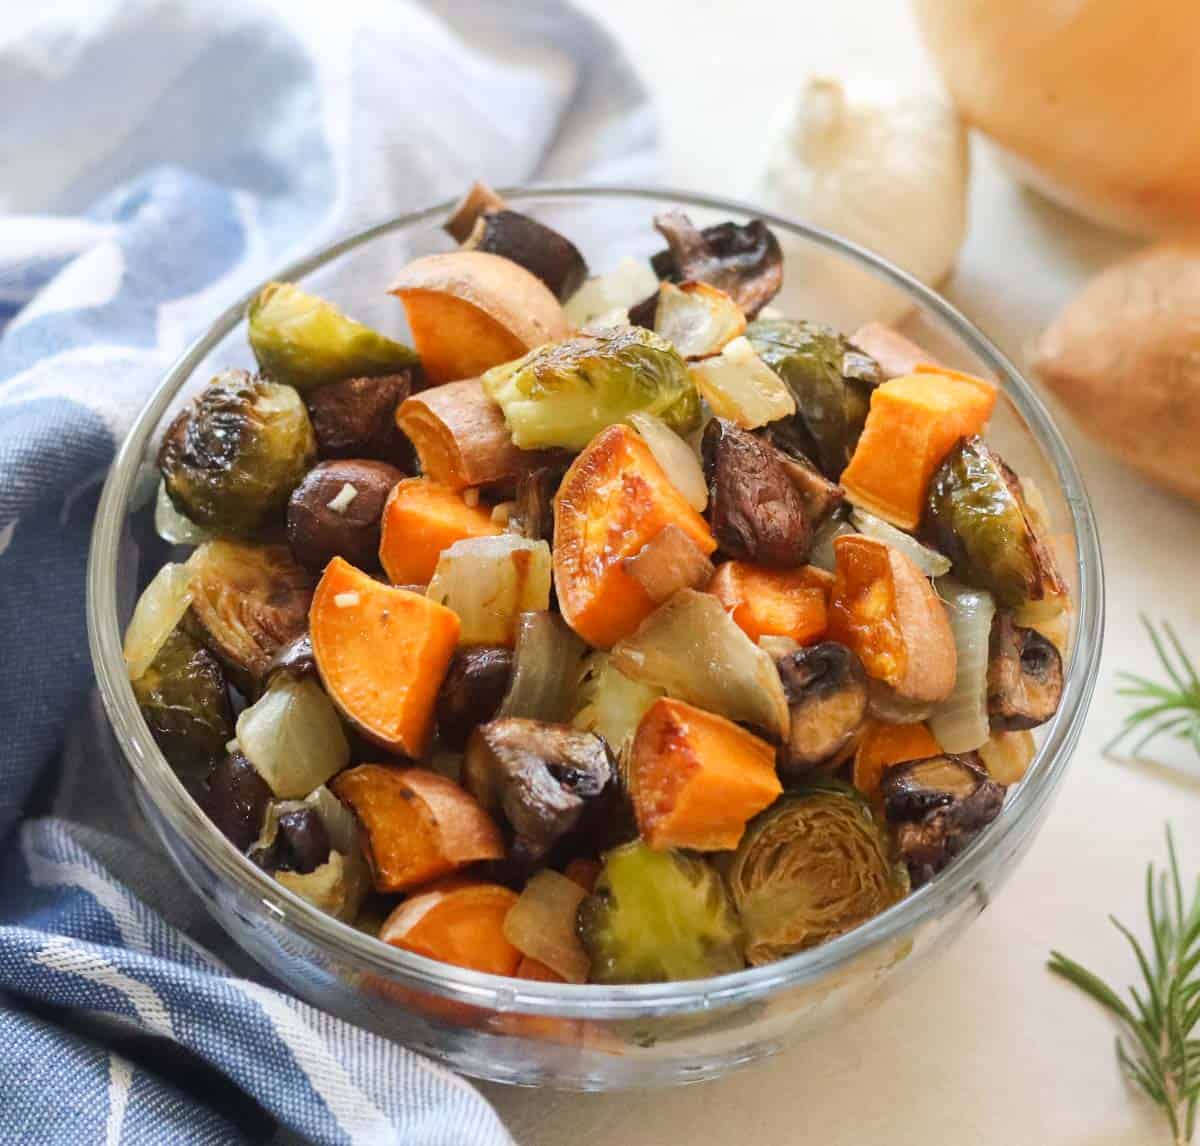 clear bowl with roasted sweet potatoes, mushrooms, onions, and brussels sprouts with rosemary, vegetables, and a blue napkin near the bowl